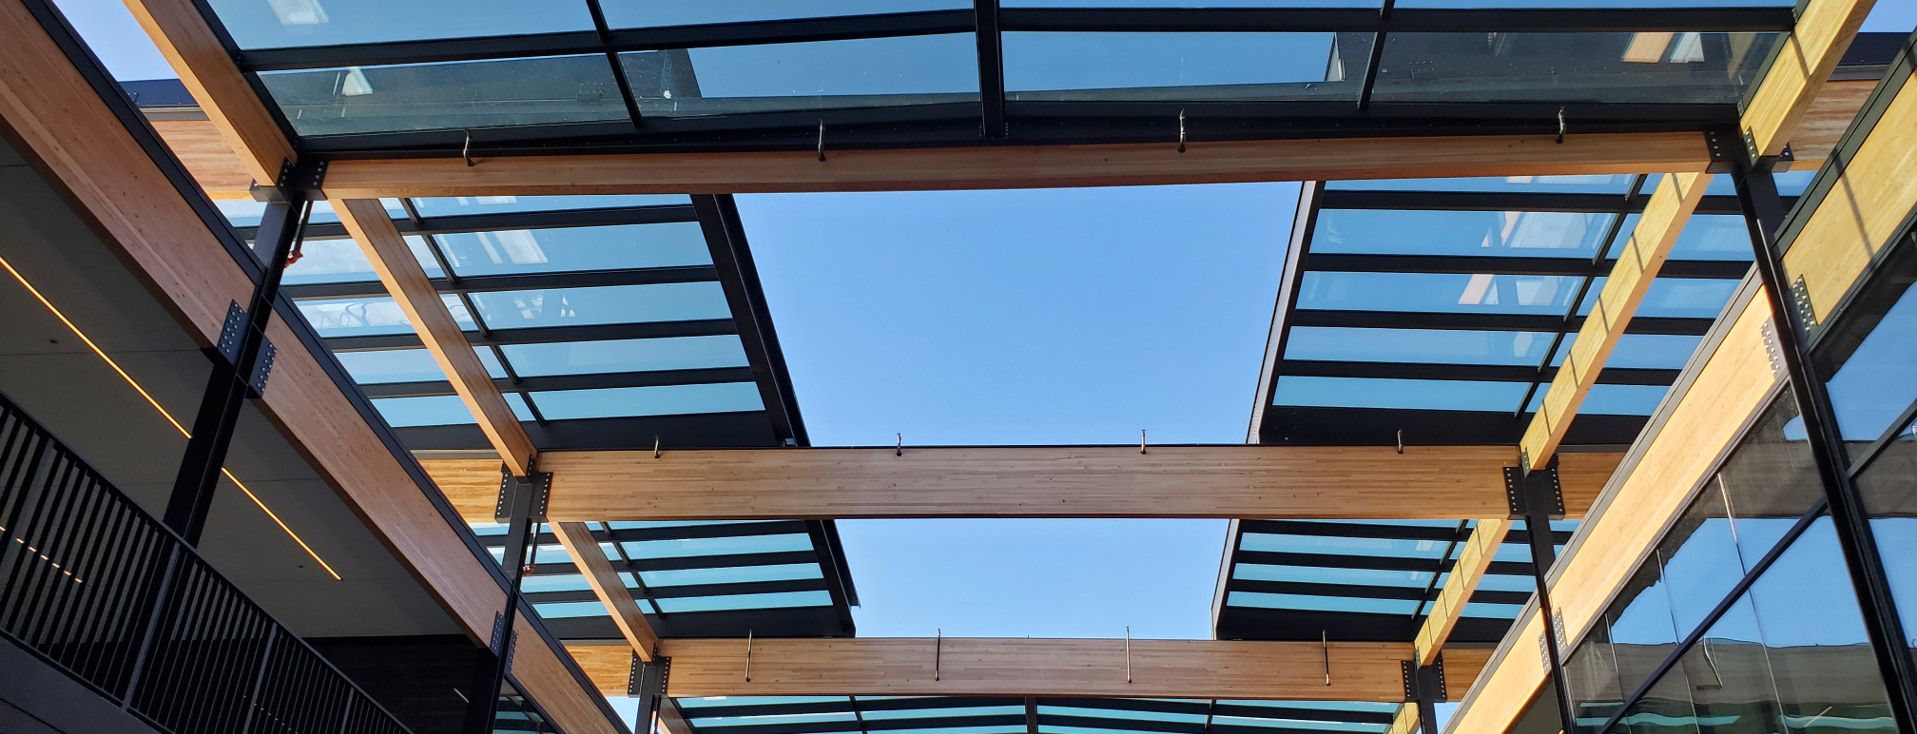 outdoors in operable roof